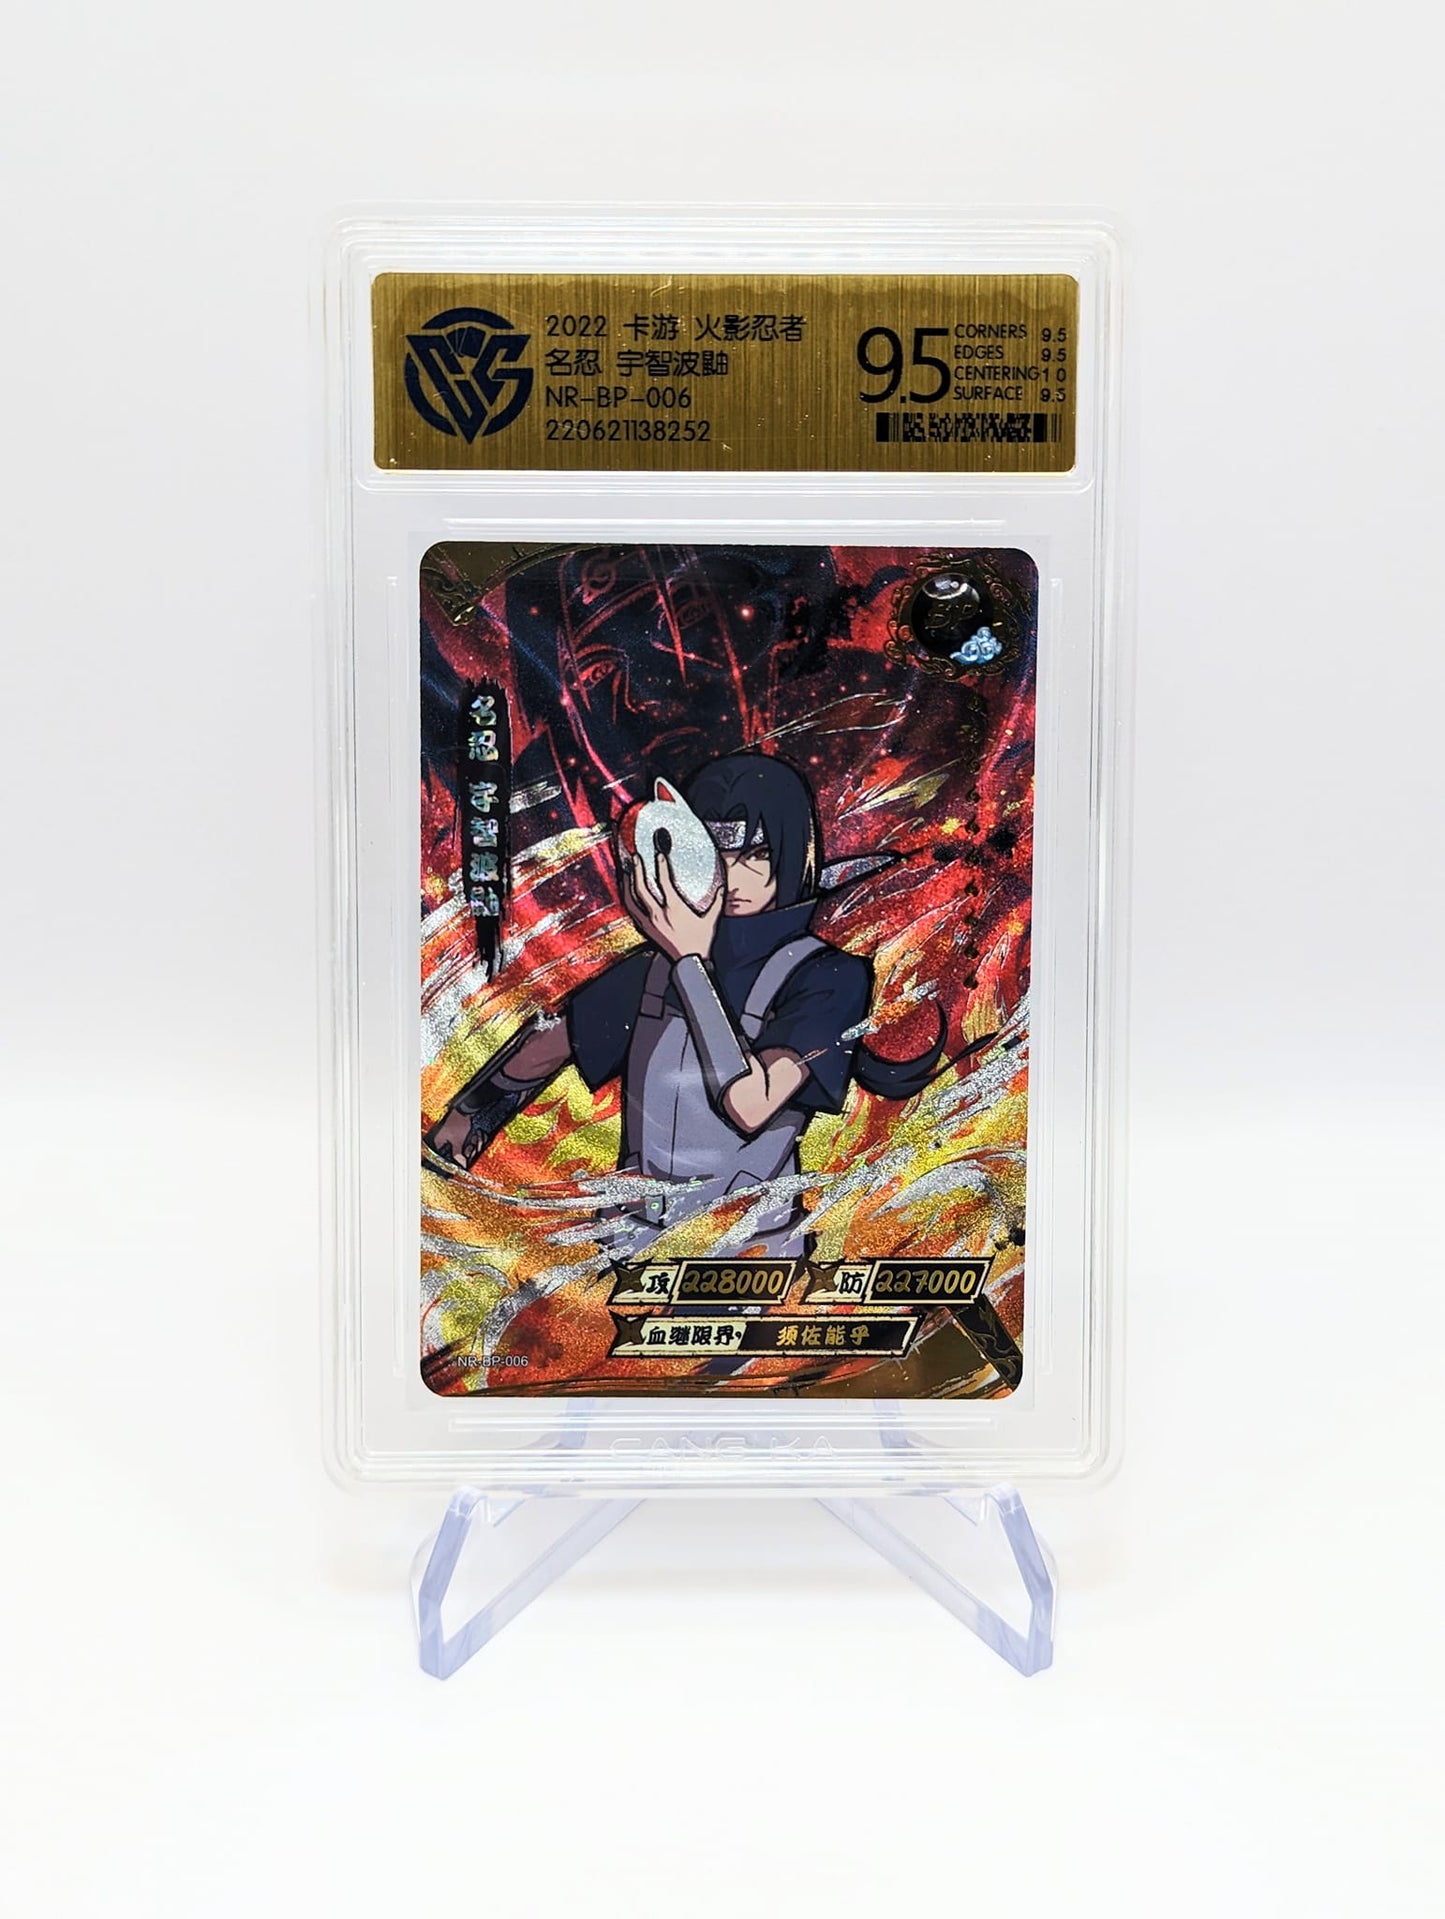 Kayou Official - Naruto Tier 4 - wave 2 - 36 Packs Booster Box